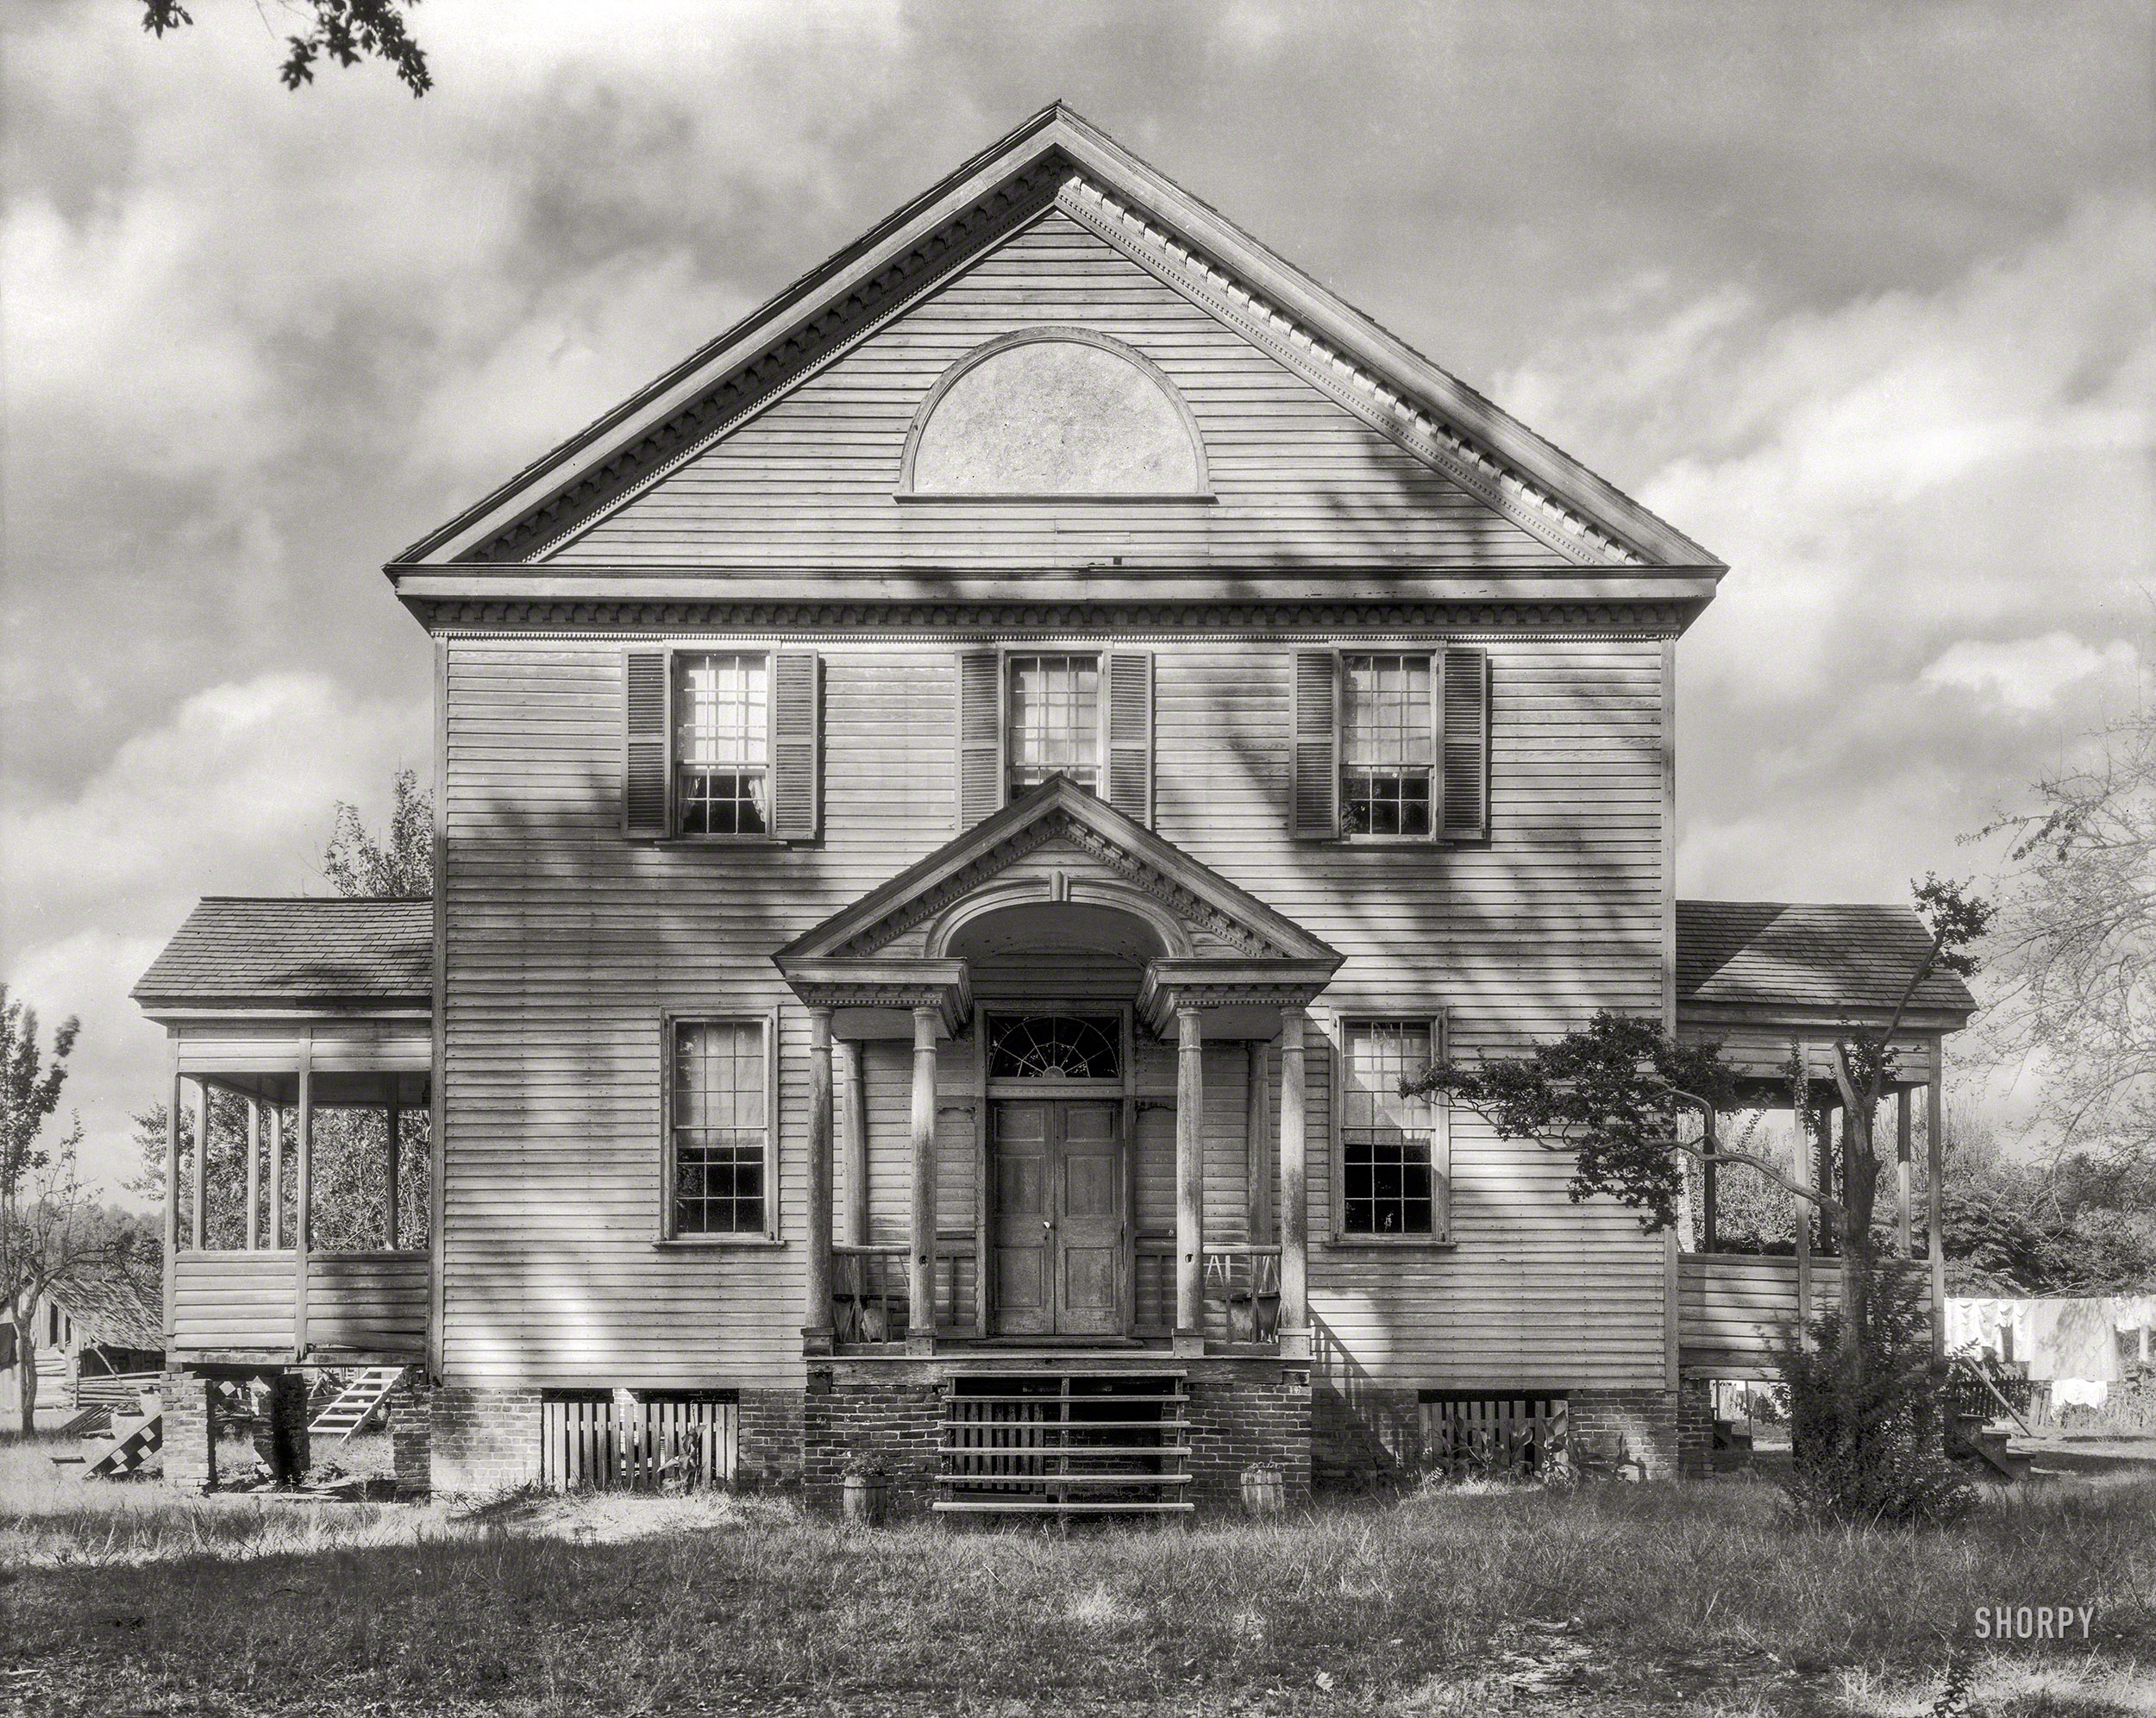 1935. "Morgan House, South Mills vicinity, Pasquotank County, North Carolina. A Regency house. Alternate title: Baxter House." 8x10 negative by Frances Benjamin Johnston, Carnegie Survey of the Architecture of the South. View full size.